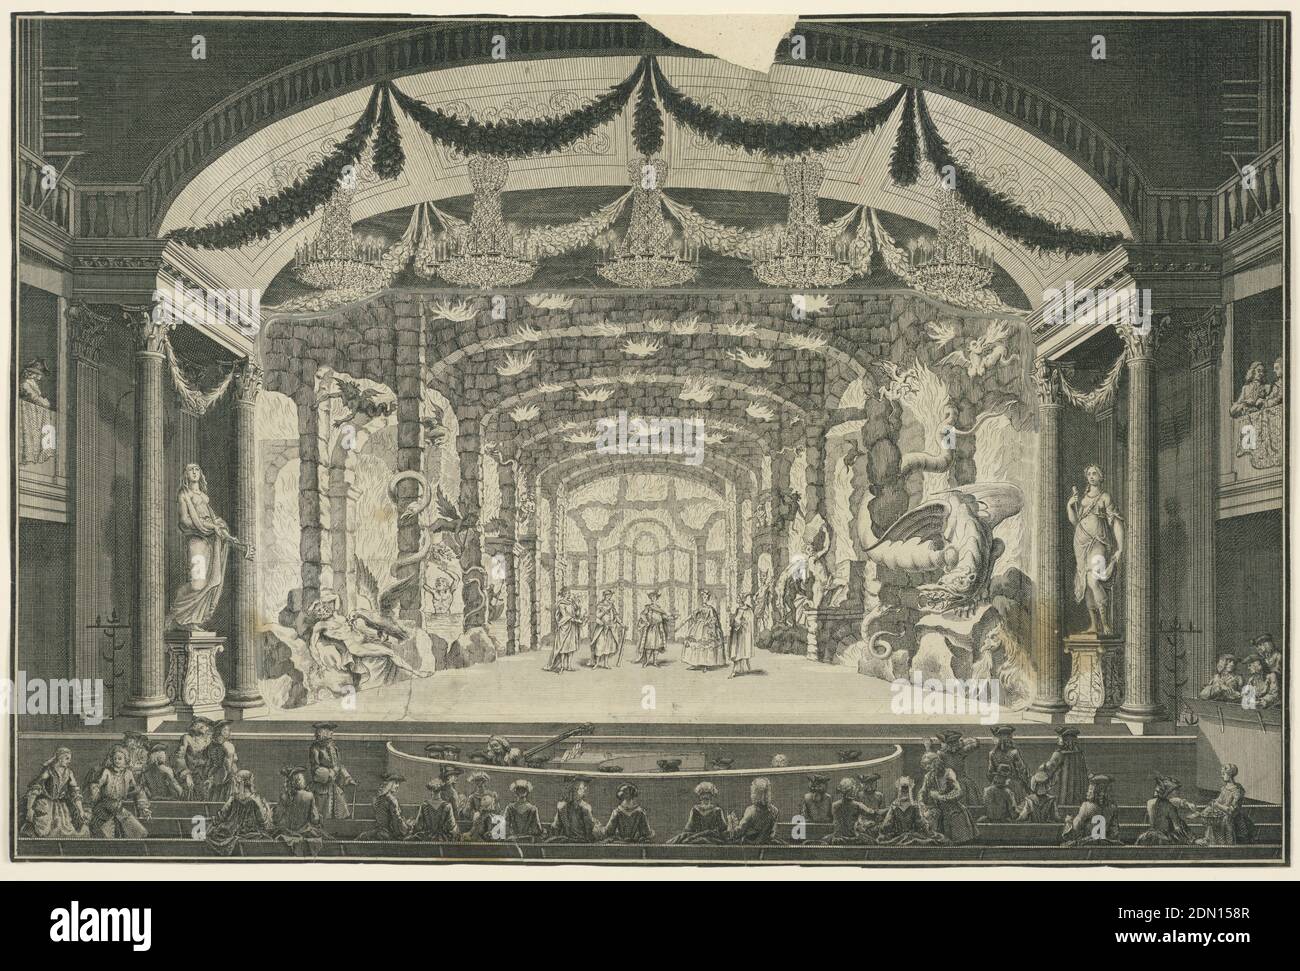 Theater Interior with Performance Taking Place, Engraving on white paper, Horizontal format. Groups of spectators watch a theatrical performance showing a representation of Inferno, with fire and demons. Actors fill the decorated stage; additional spctators in opera boxes at left and right sides. Five large chandeliers hanging from the theater ceiling, which is draped with festoons. Stage design engraved separately., Europe and USA, Netherlands, ca. 1740–60, theater, Print Stock Photo